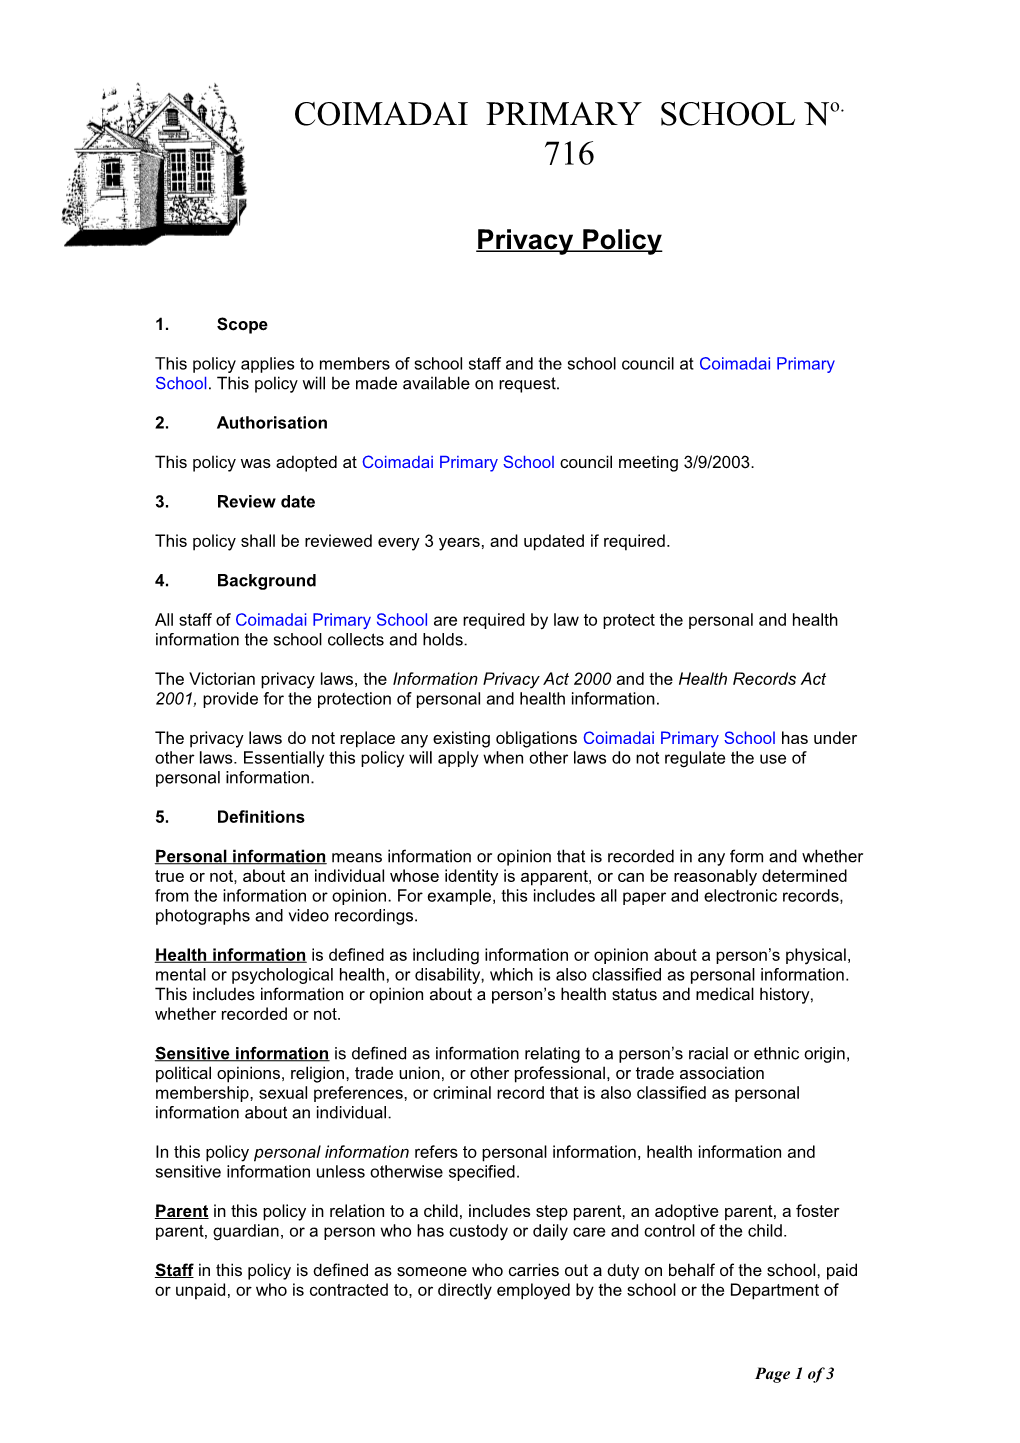 Suggestions for the Development of a School Privacy Policy